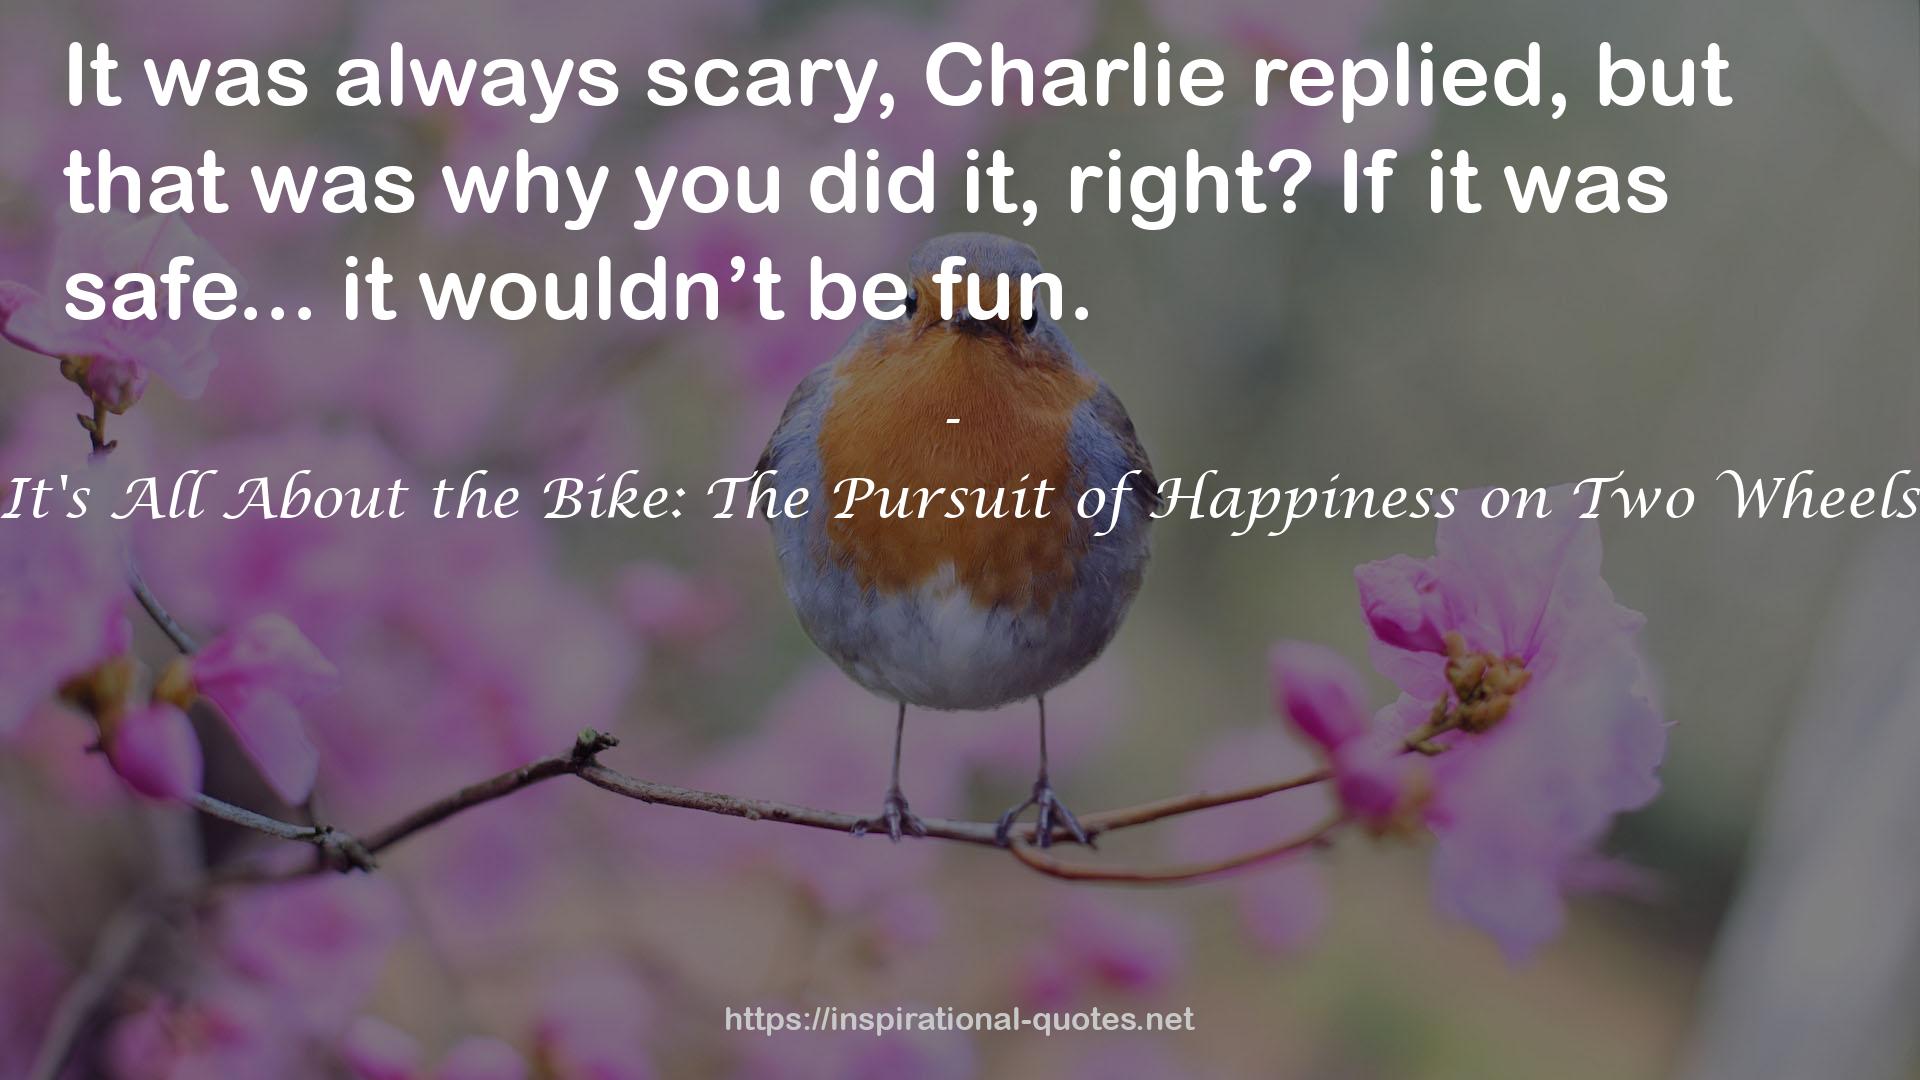 It's All About the Bike: The Pursuit of Happiness on Two Wheels QUOTES